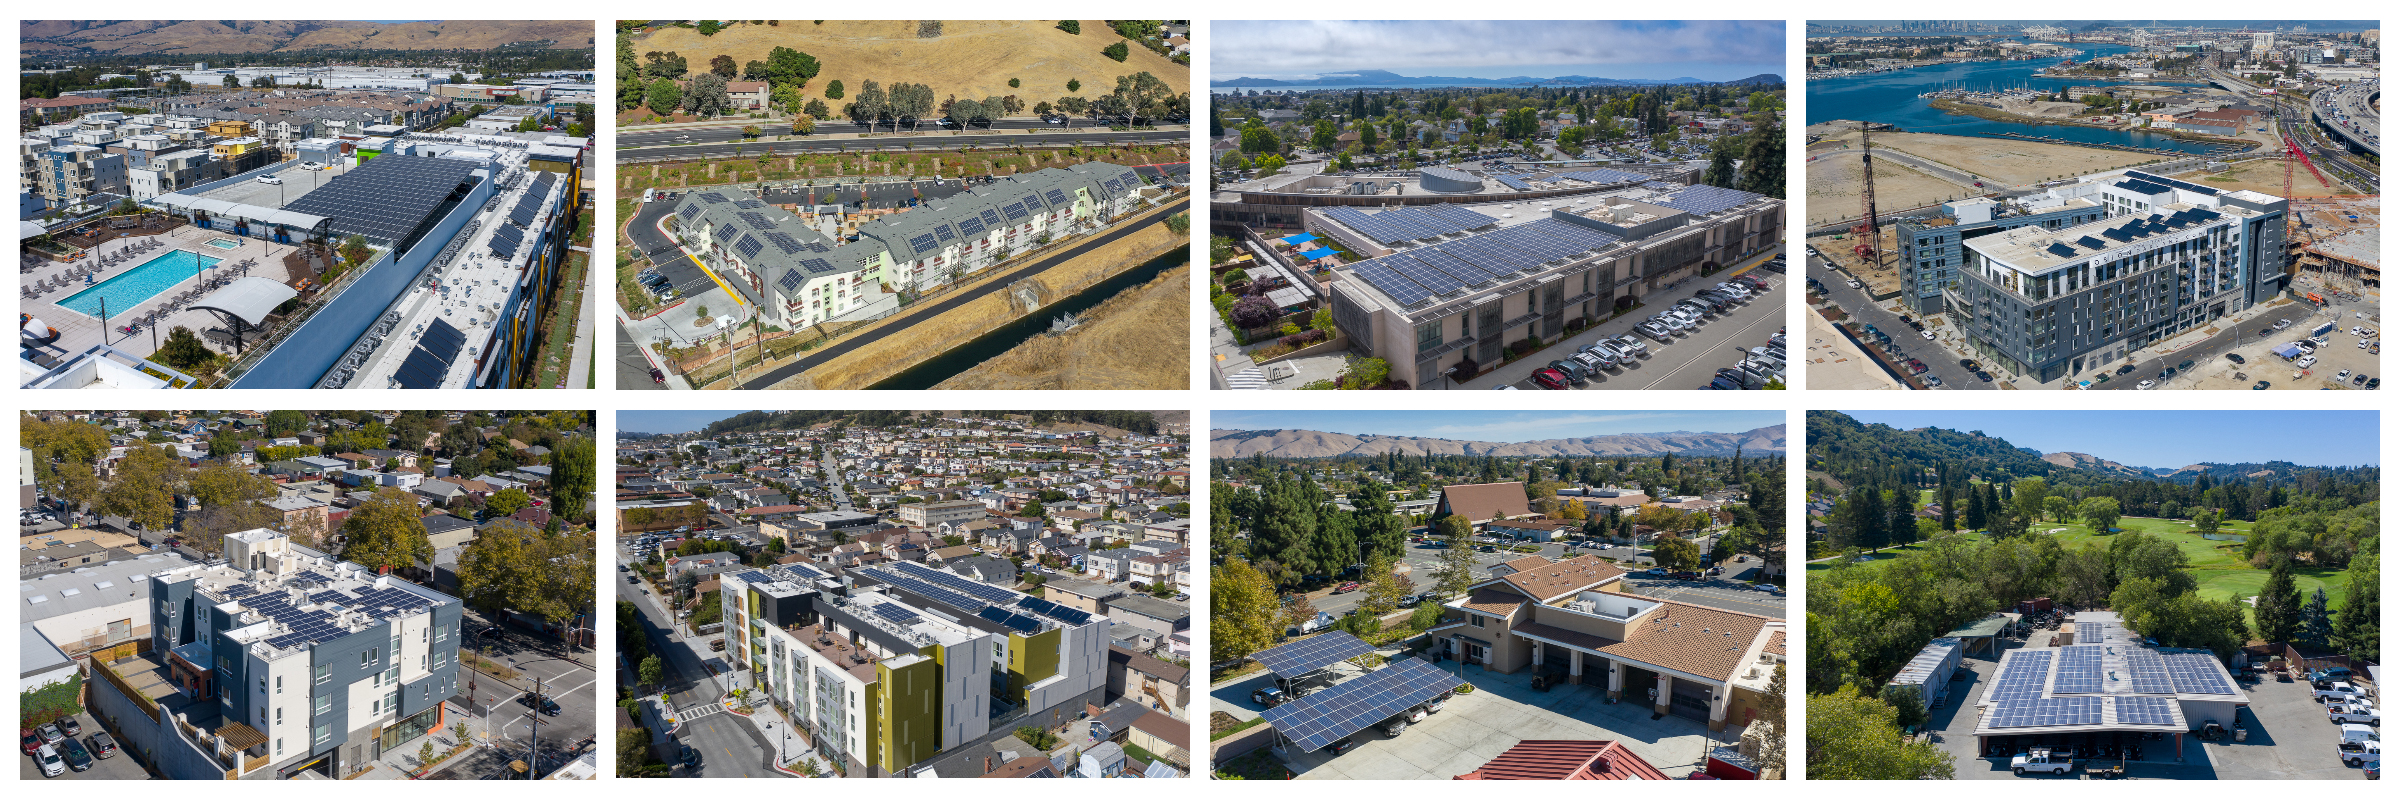 Solar Roofs Drone Gallery